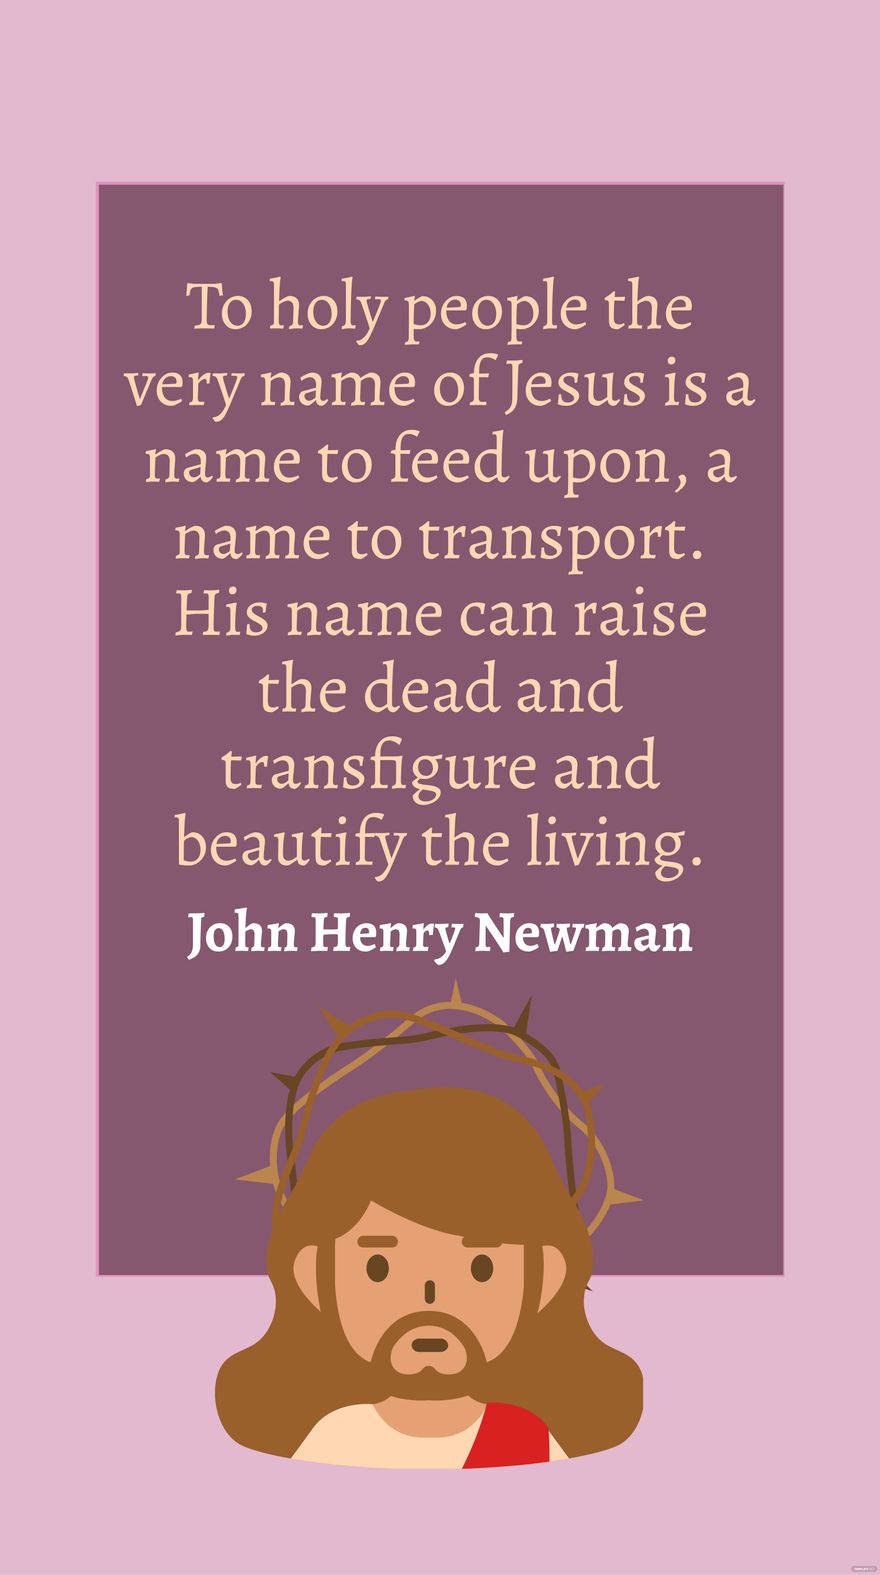 John Henry Newman - To holy people the very name of Jesus is a name to feed upon, a name to transport. His name can raise the dead and transfigure and beautify the living. in JPG